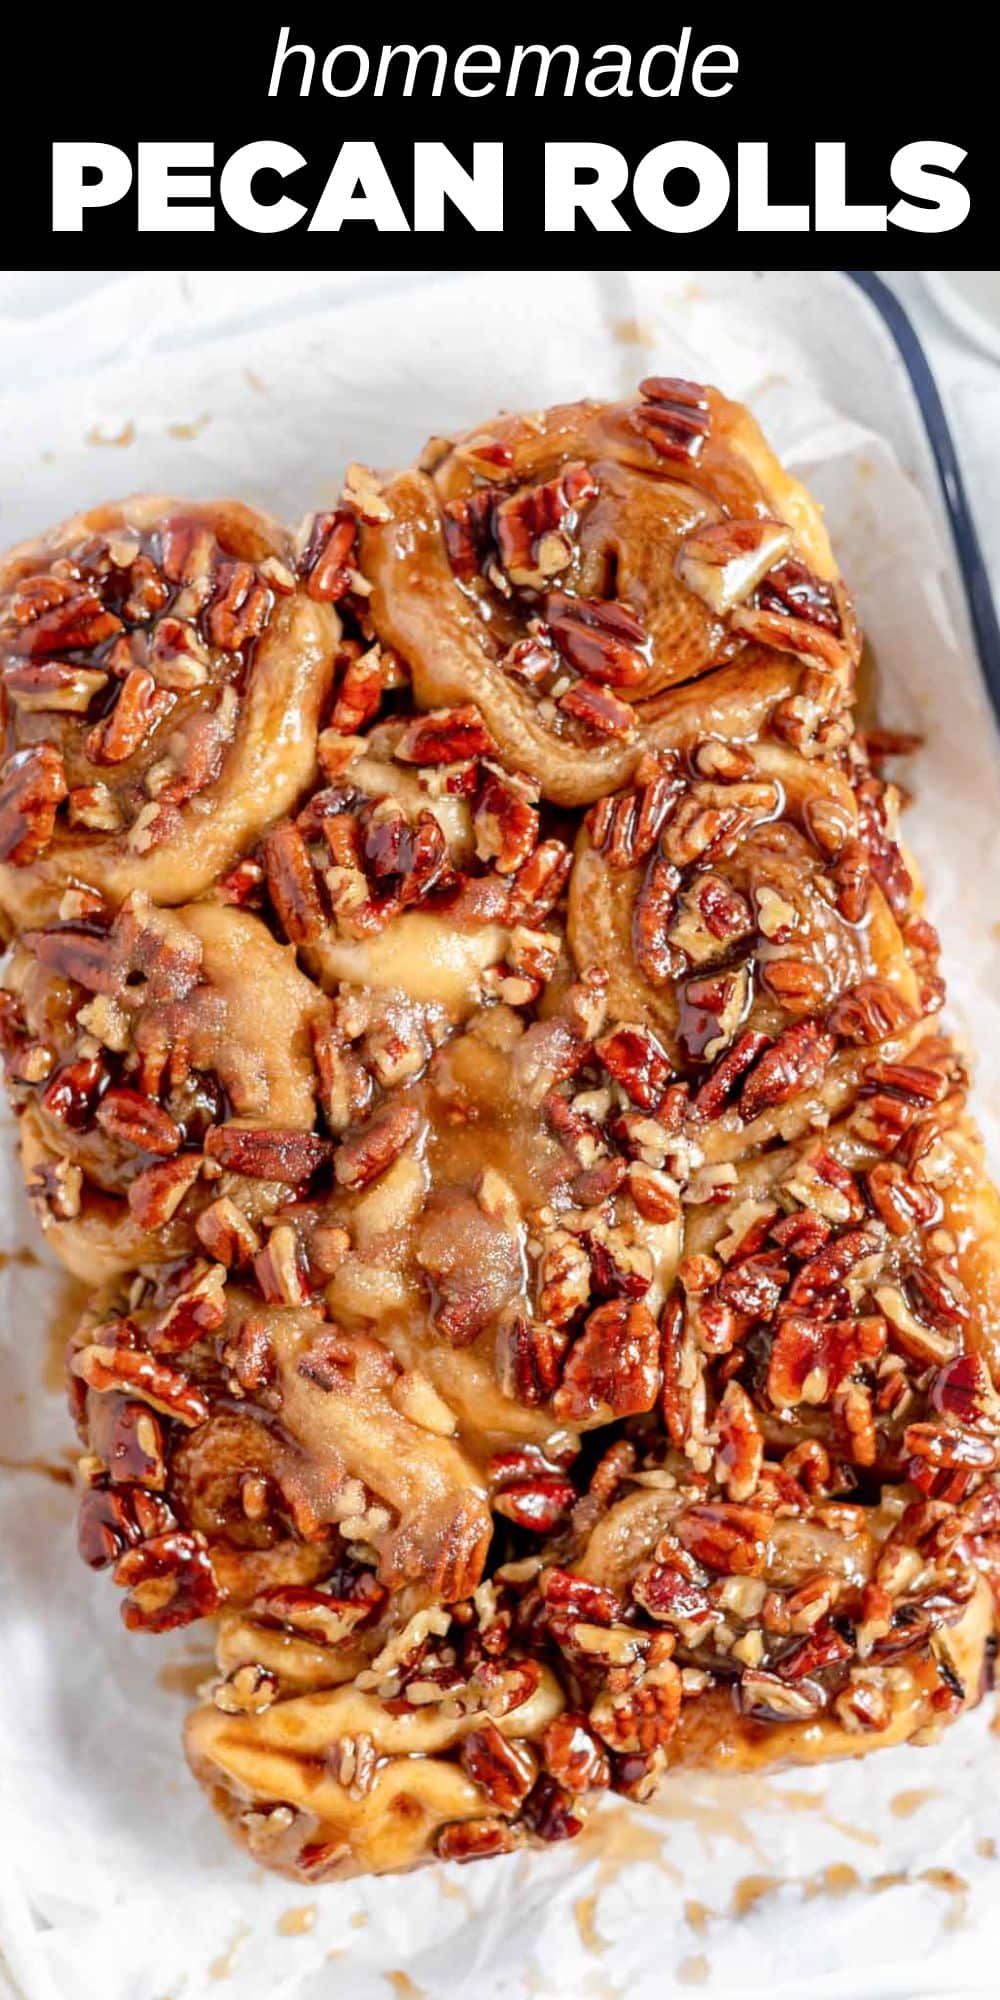 Savor warm, homemade Pecan Rolls: sweet, gooey, and perfect for any occasion.